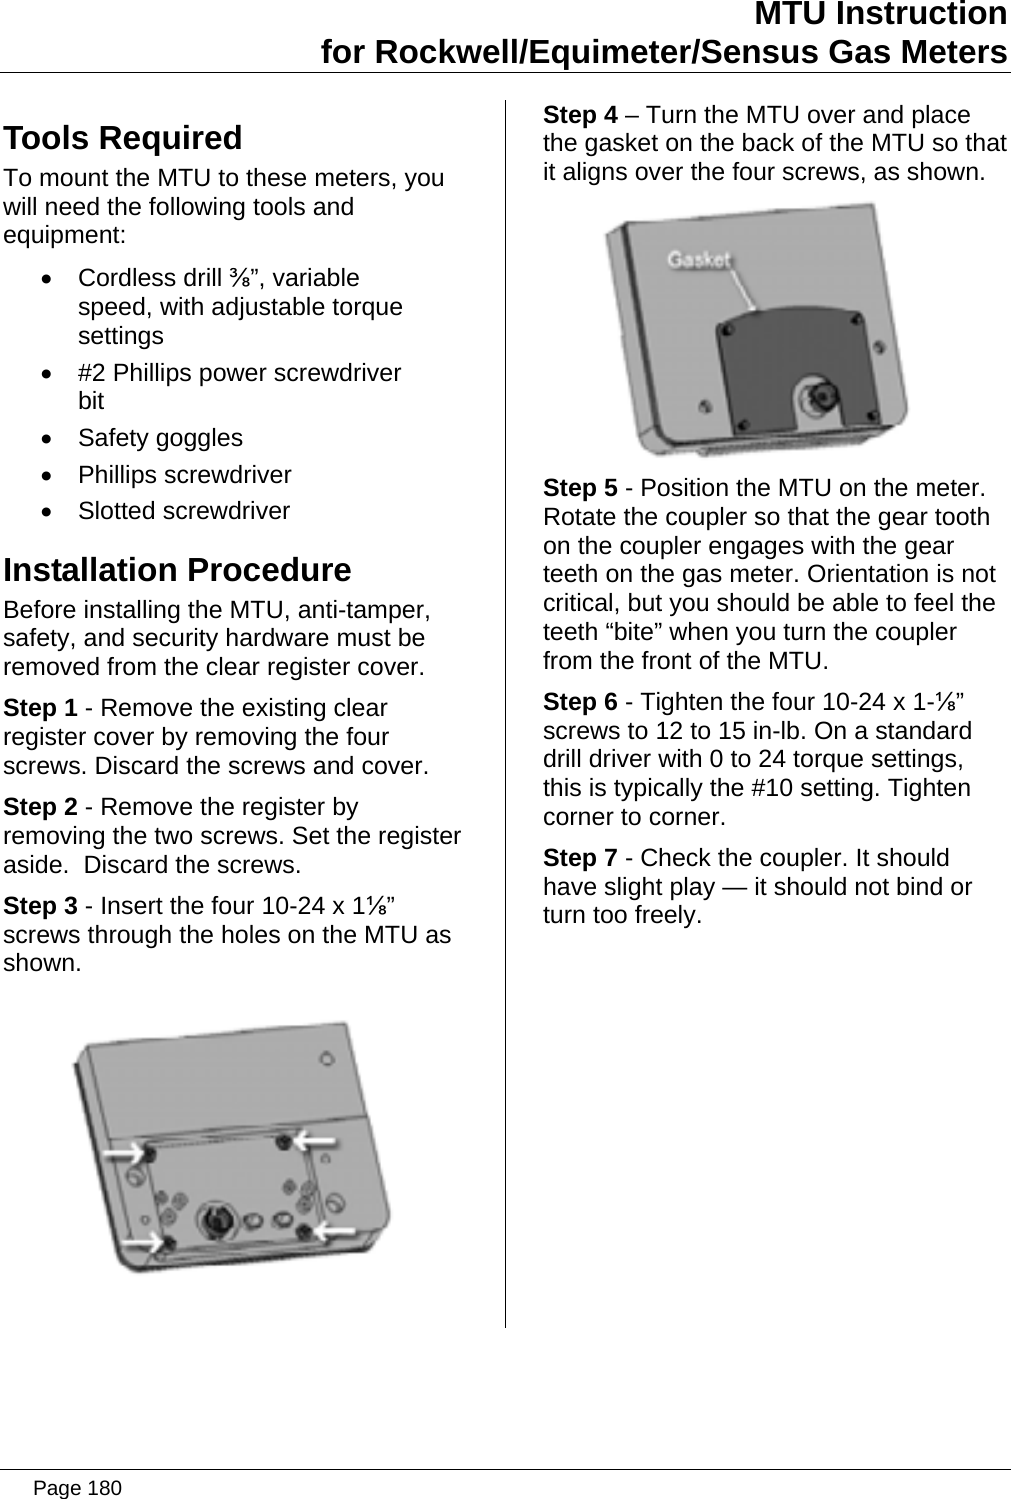 MTU Instruction for Rockwell/Equimeter/Sensus Gas Meters Tools Required To mount the MTU to these meters, you will need the following tools and equipment: • Cordless drill ⅜”, variable speed, with adjustable torque settings •  #2 Phillips power screwdriver bit • Safety goggles • Phillips screwdriver • Slotted screwdriver Installation Procedure Before installing the MTU, anti-tamper, safety, and security hardware must be removed from the clear register cover. Step 1 - Remove the existing clear register cover by removing the four screws. Discard the screws and cover. Step 2 - Remove the register by removing the two screws. Set the register aside.  Discard the screws. Step 3 - Insert the four 10-24 x 1⅛” screws through the holes on the MTU as shown.  Step 4 – Turn the MTU over and place the gasket on the back of the MTU so that it aligns over the four screws, as shown.  Step 5 - Position the MTU on the meter. Rotate the coupler so that the gear tooth on the coupler engages with the gear teeth on the gas meter. Orientation is not critical, but you should be able to feel the teeth “bite” when you turn the coupler from the front of the MTU. Step 6 - Tighten the four 10-24 x 1-⅛” screws to 12 to 15 in-lb. On a standard drill driver with 0 to 24 torque settings, this is typically the #10 setting. Tighten corner to corner. Step 7 - Check the coupler. It should have slight play — it should not bind or turn too freely.  Page 180